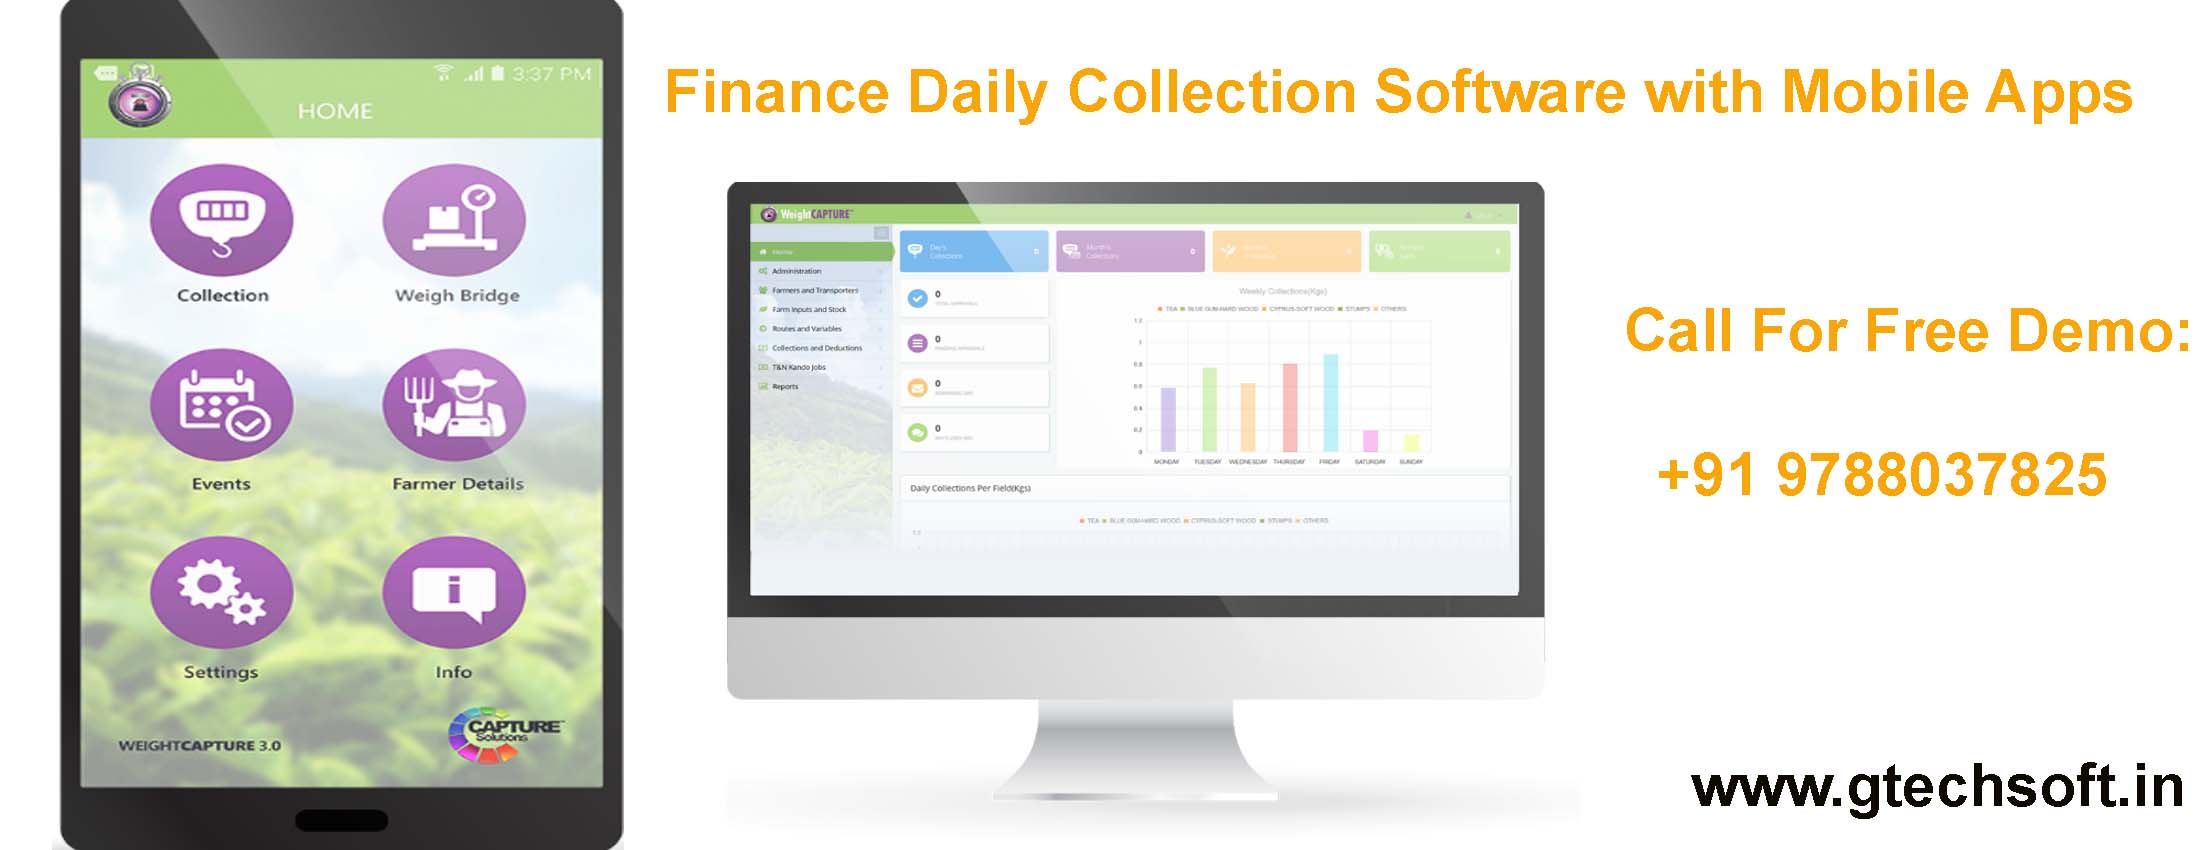 Generic Finance Daily Collection Software